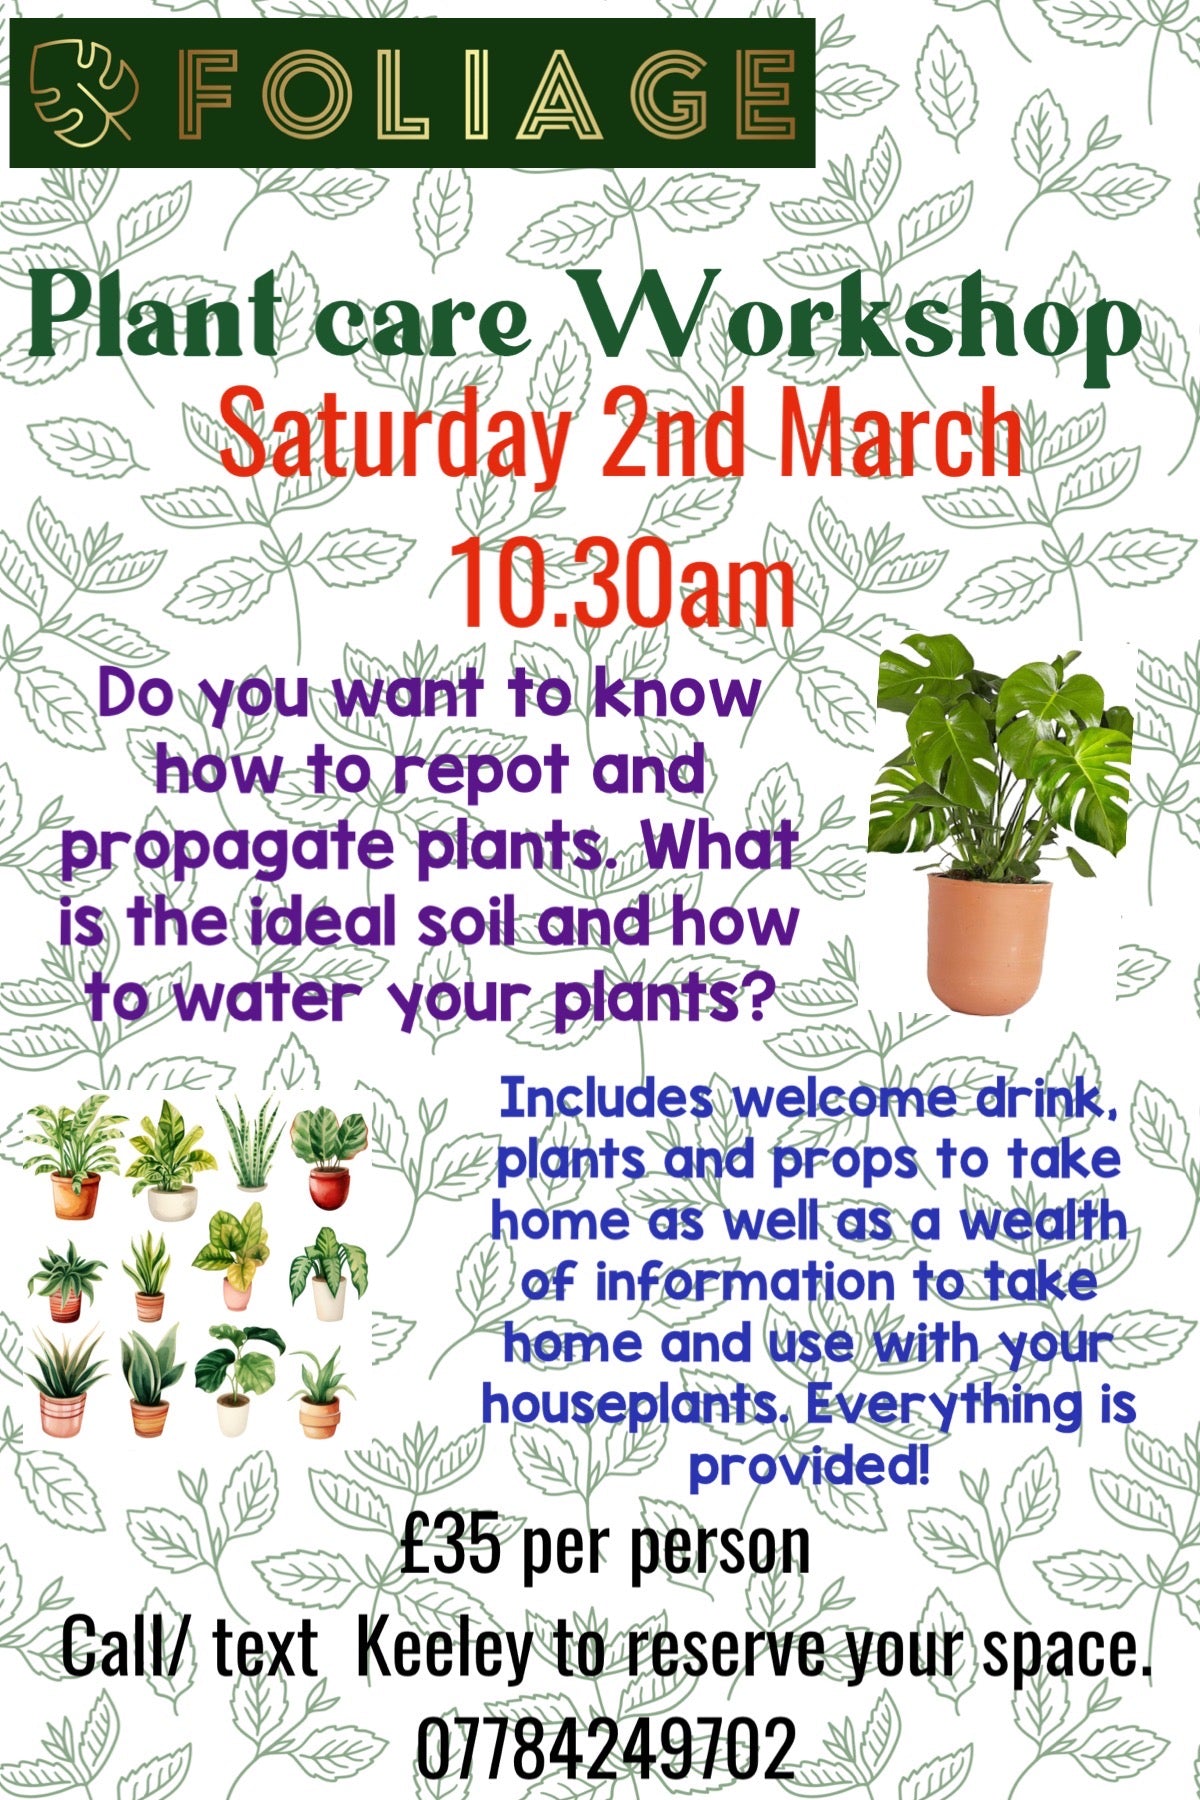 Plant Care Workshop Saturday 2nd March 10.30am